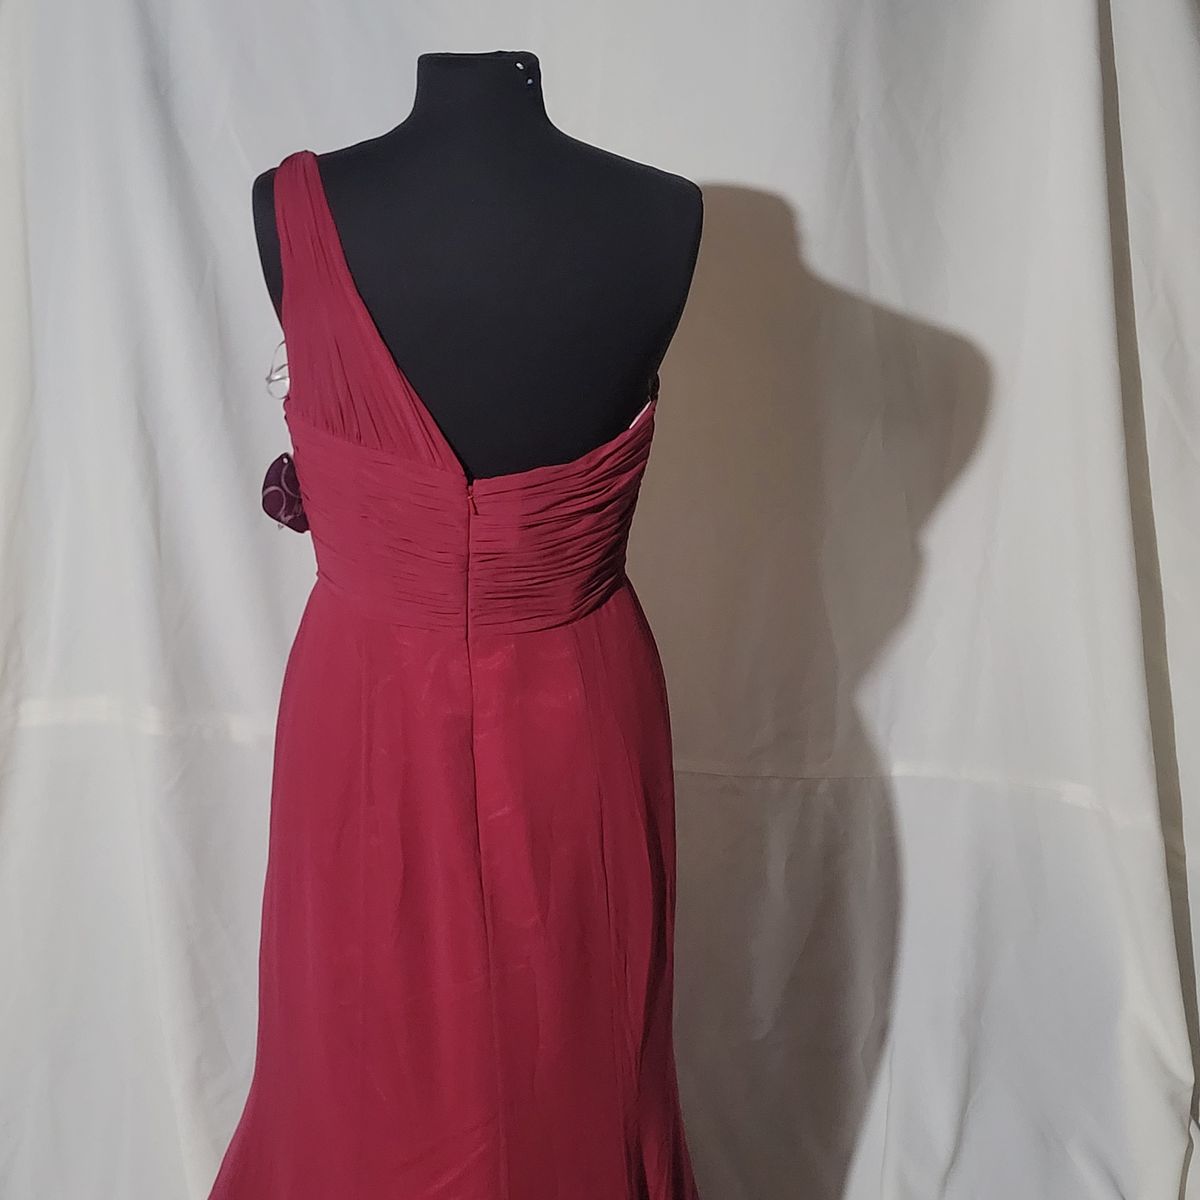 Size 10 Bridesmaid Sequined Burgundy Red Cocktail Dress on Queenly